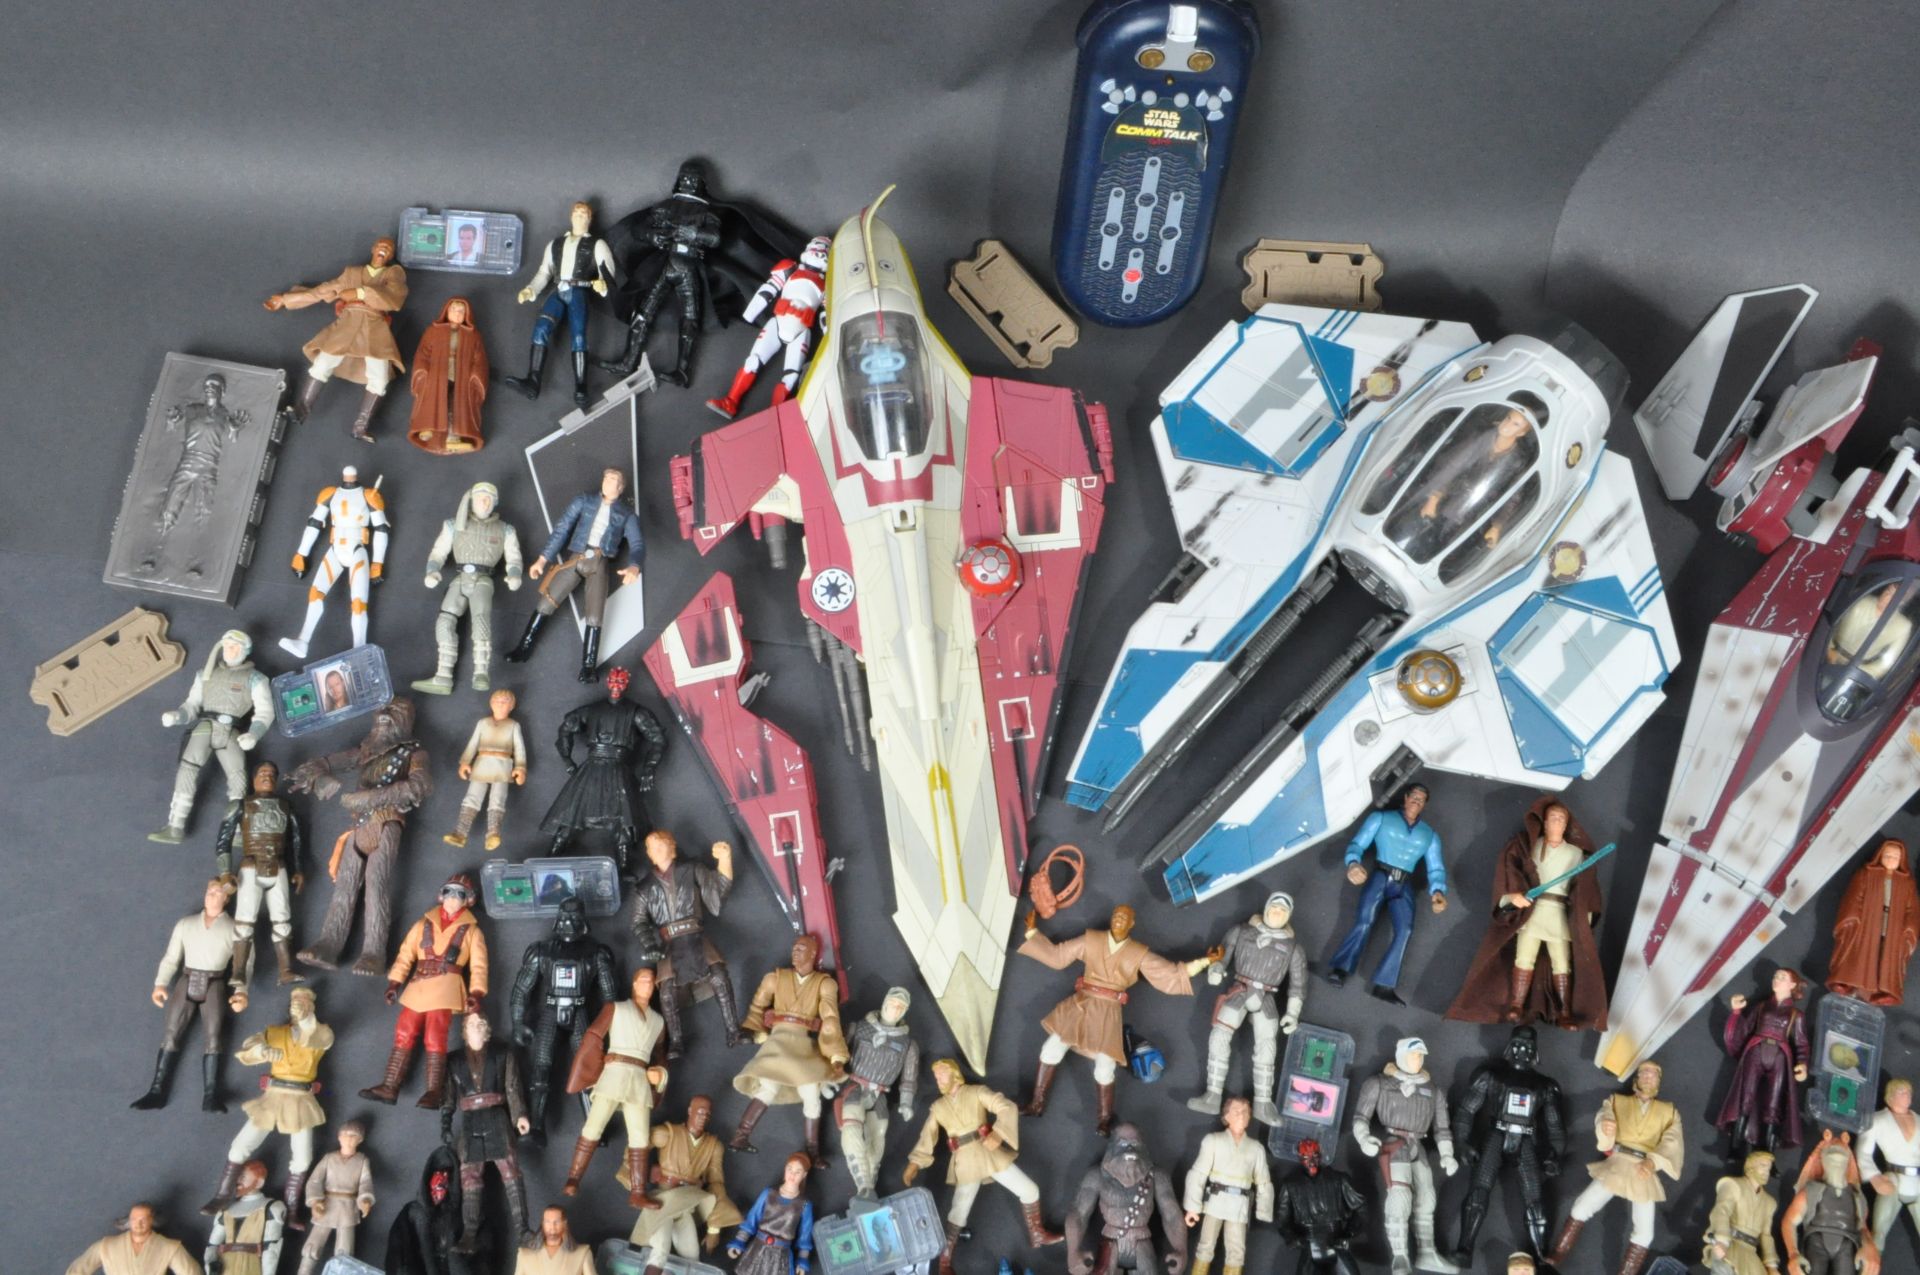 STAR WARS - LARGE COLLECTION KENNER / HASBRO CLONE WARS & OTHER FIGURES - Image 4 of 10